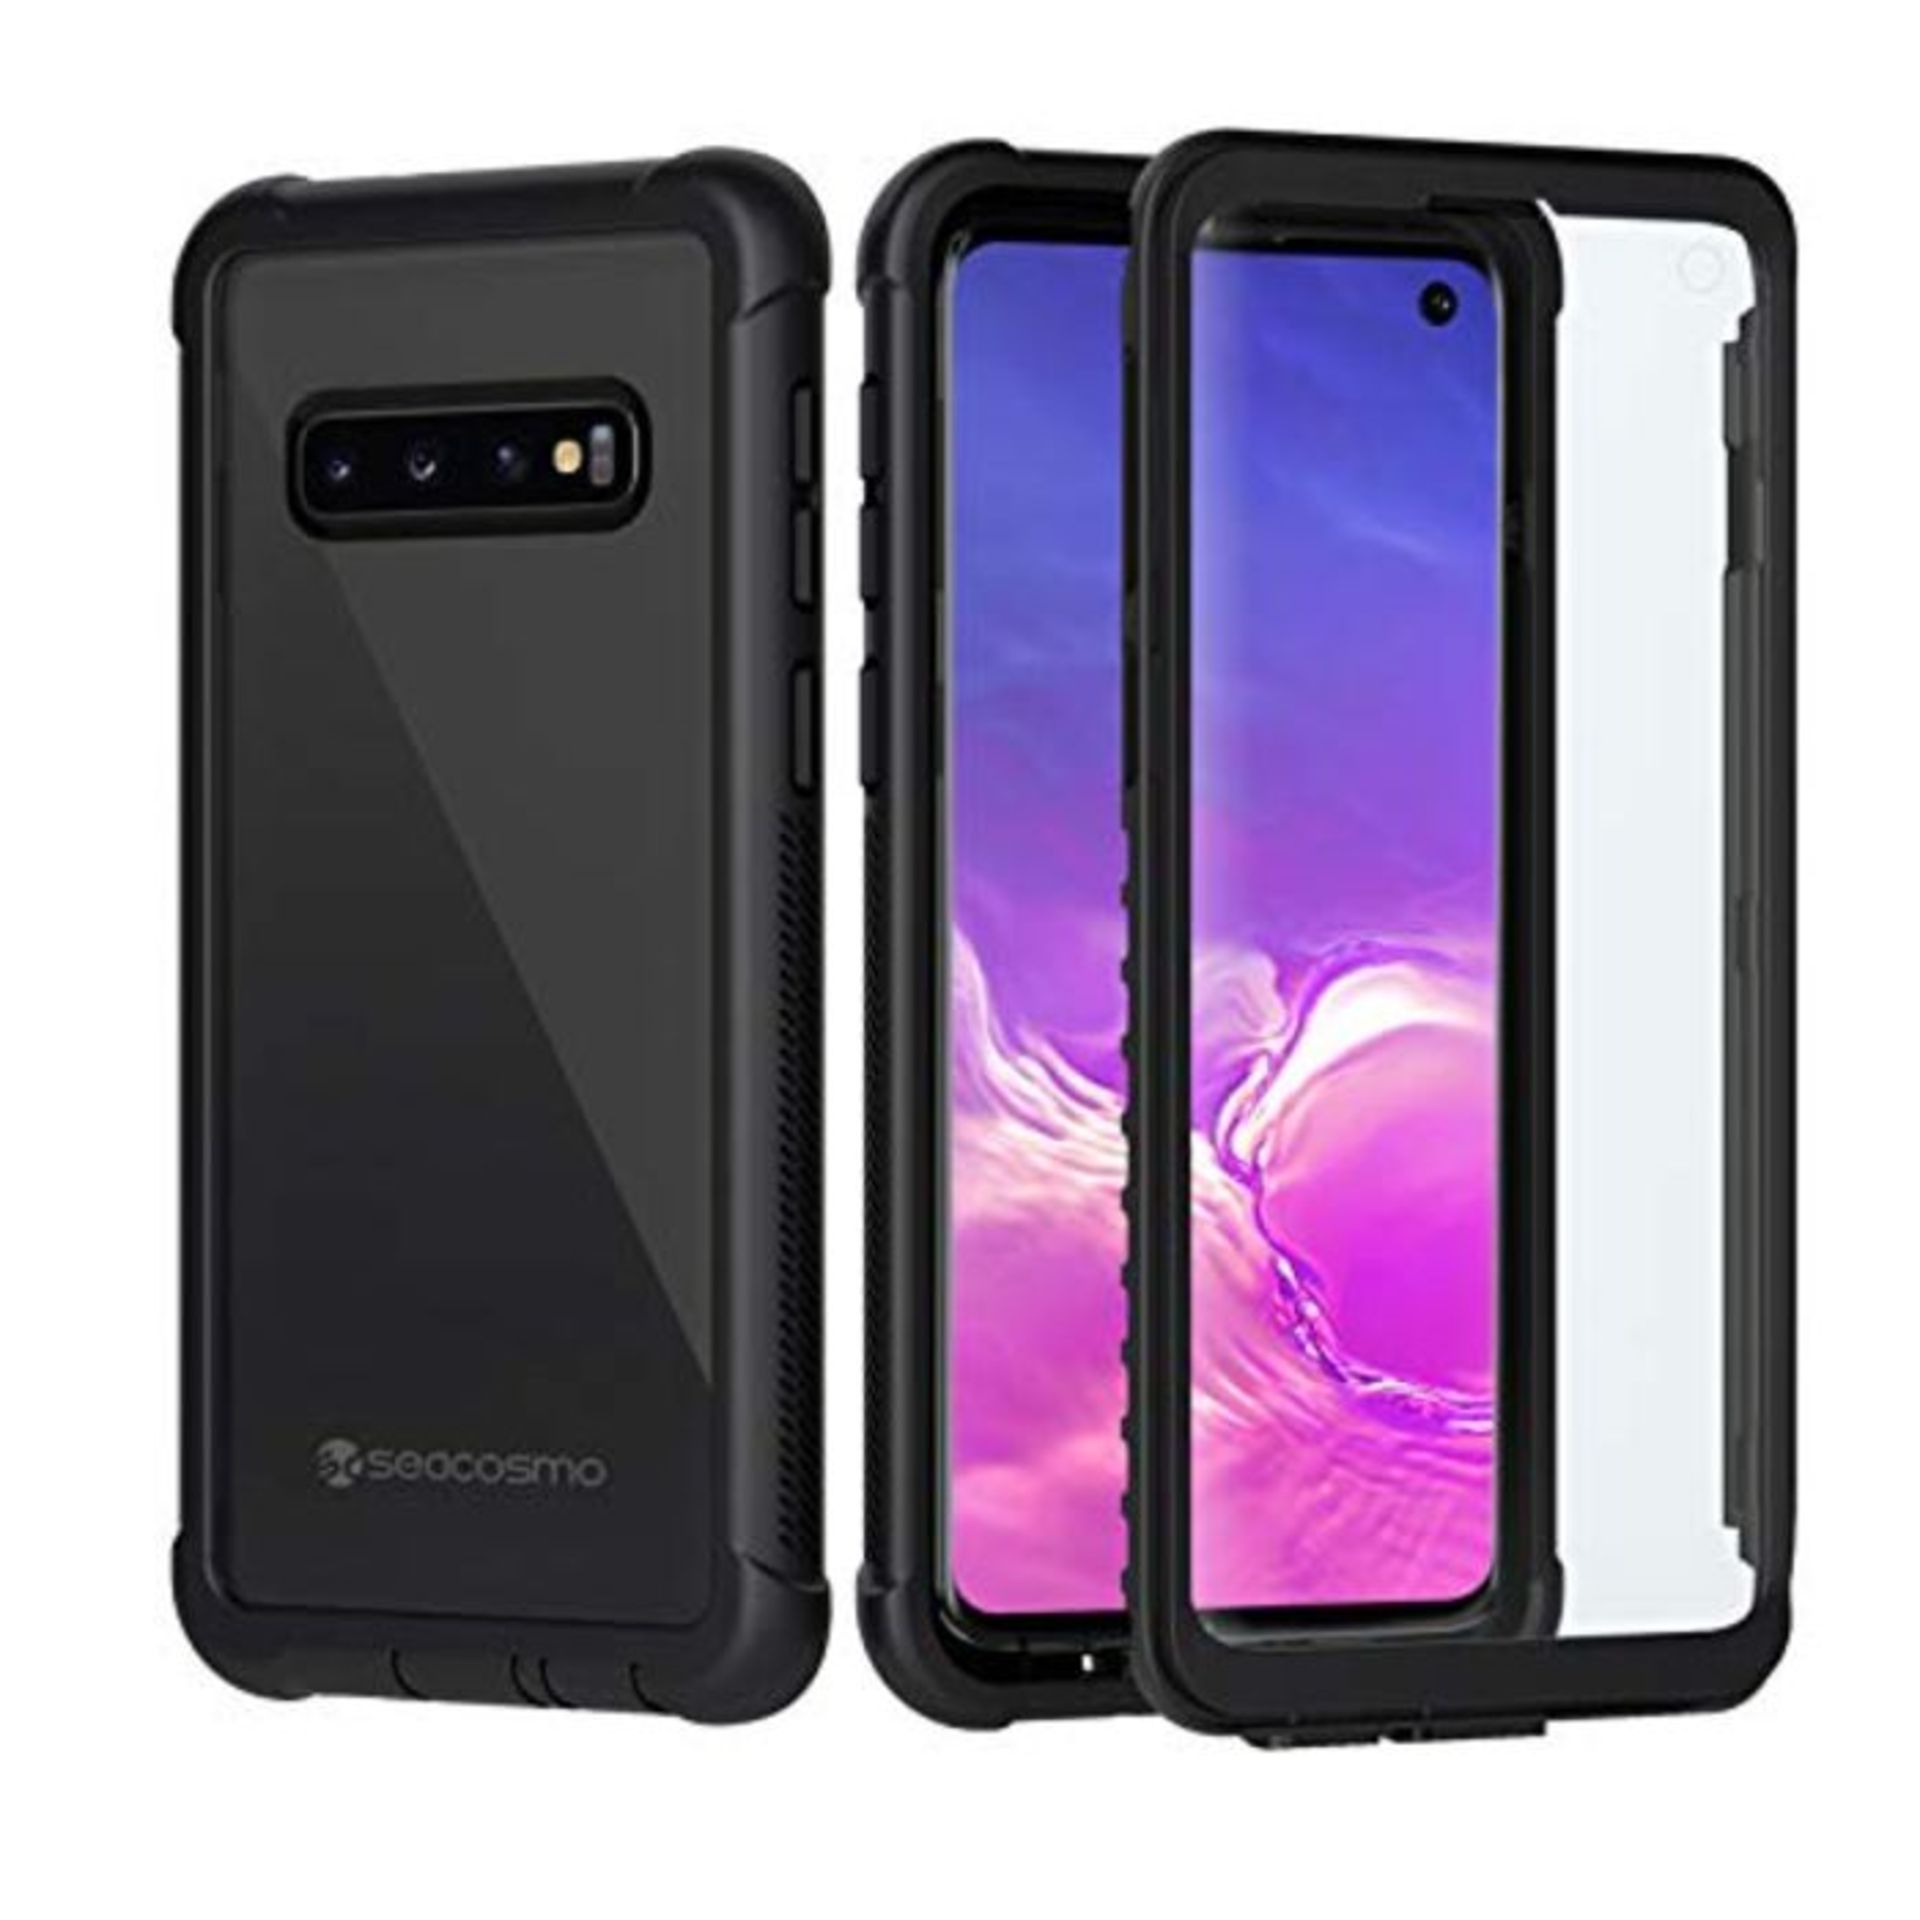 seacosmo Samsung S10 Case, Full Body Shockproof Cover with Built-in Screen Protector [